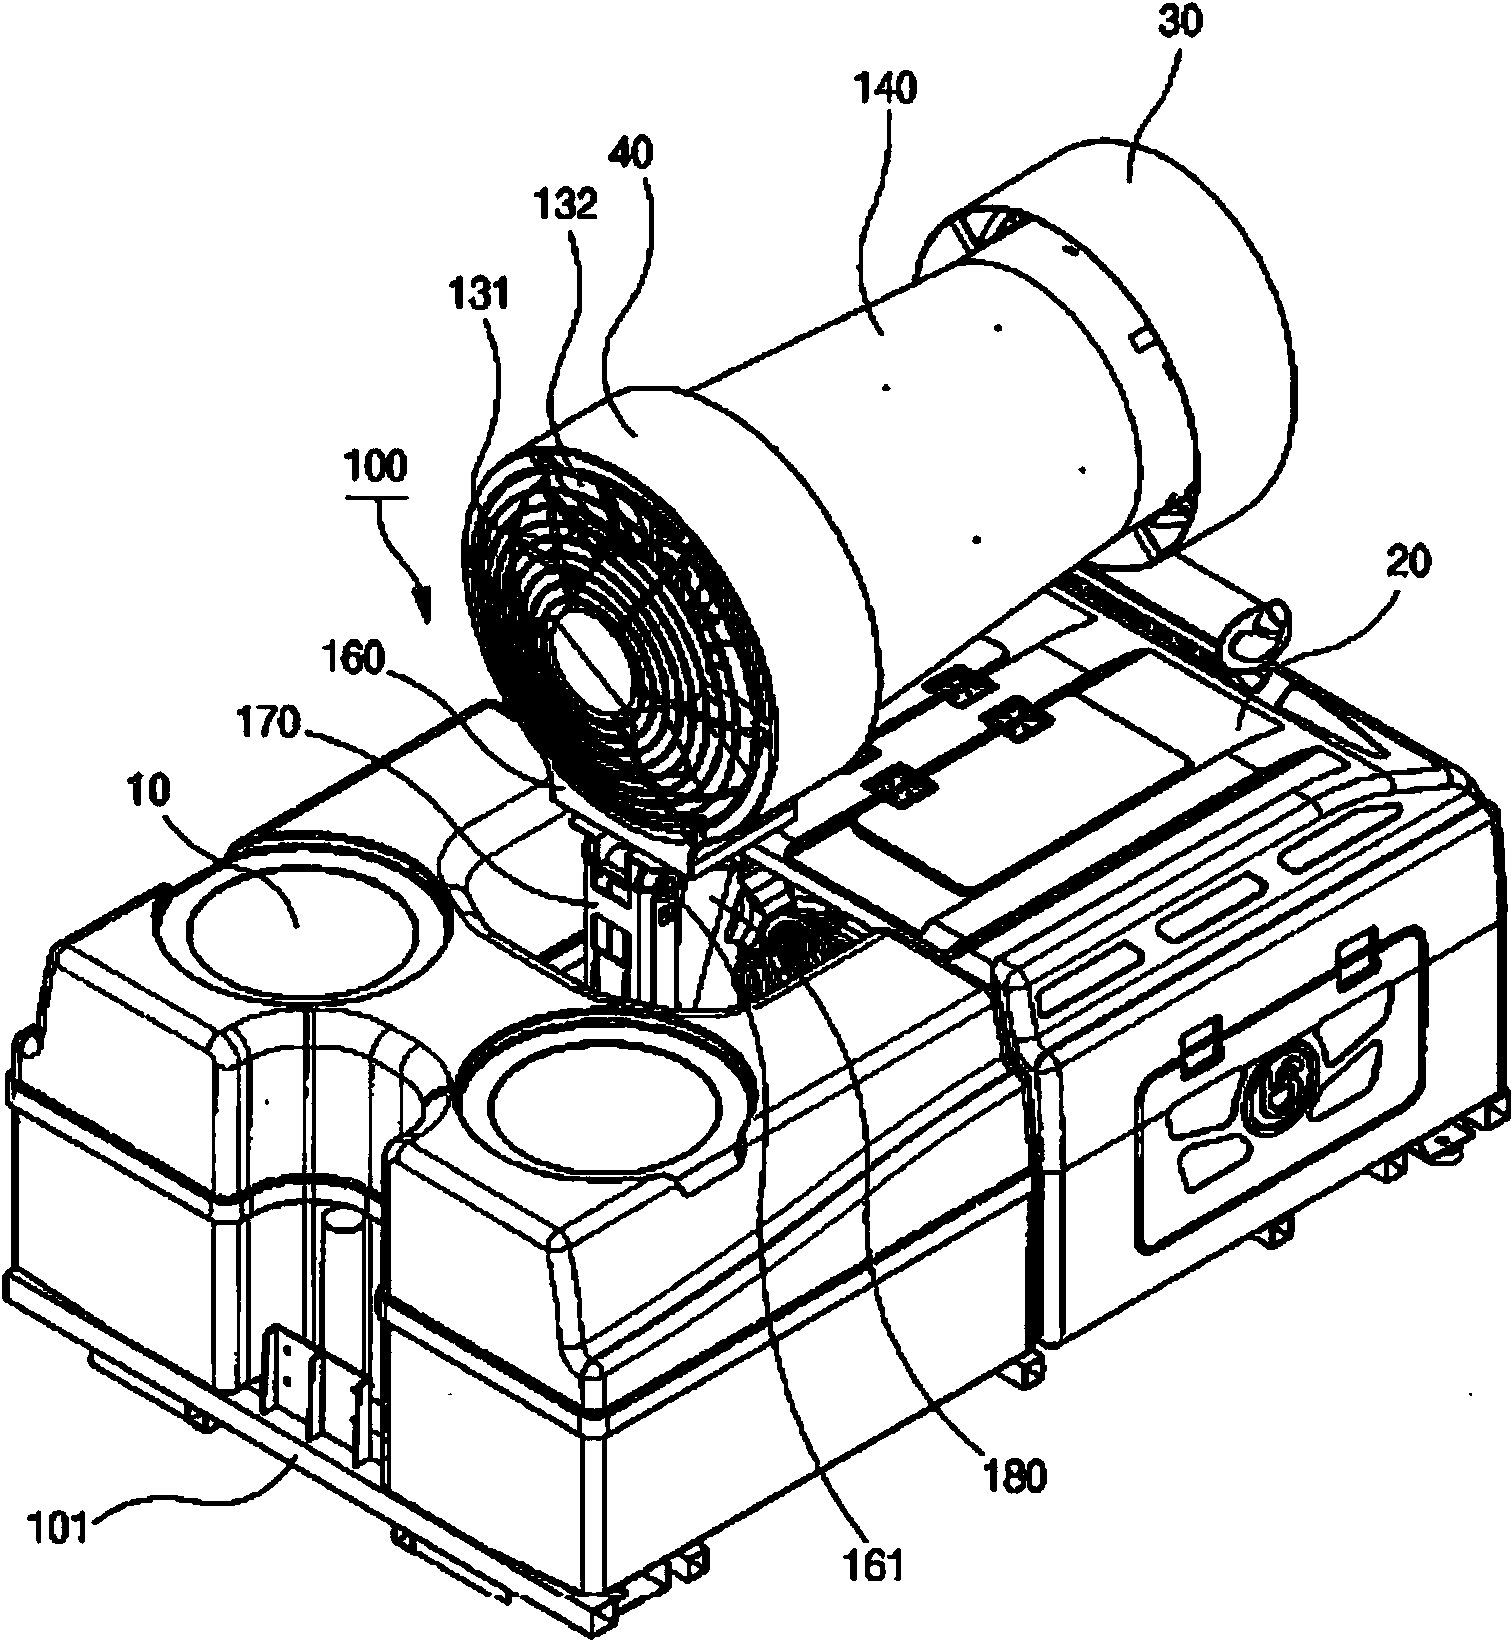 Smart pest control apparatus allowing wireless control and variable adjustment of dispersion amount